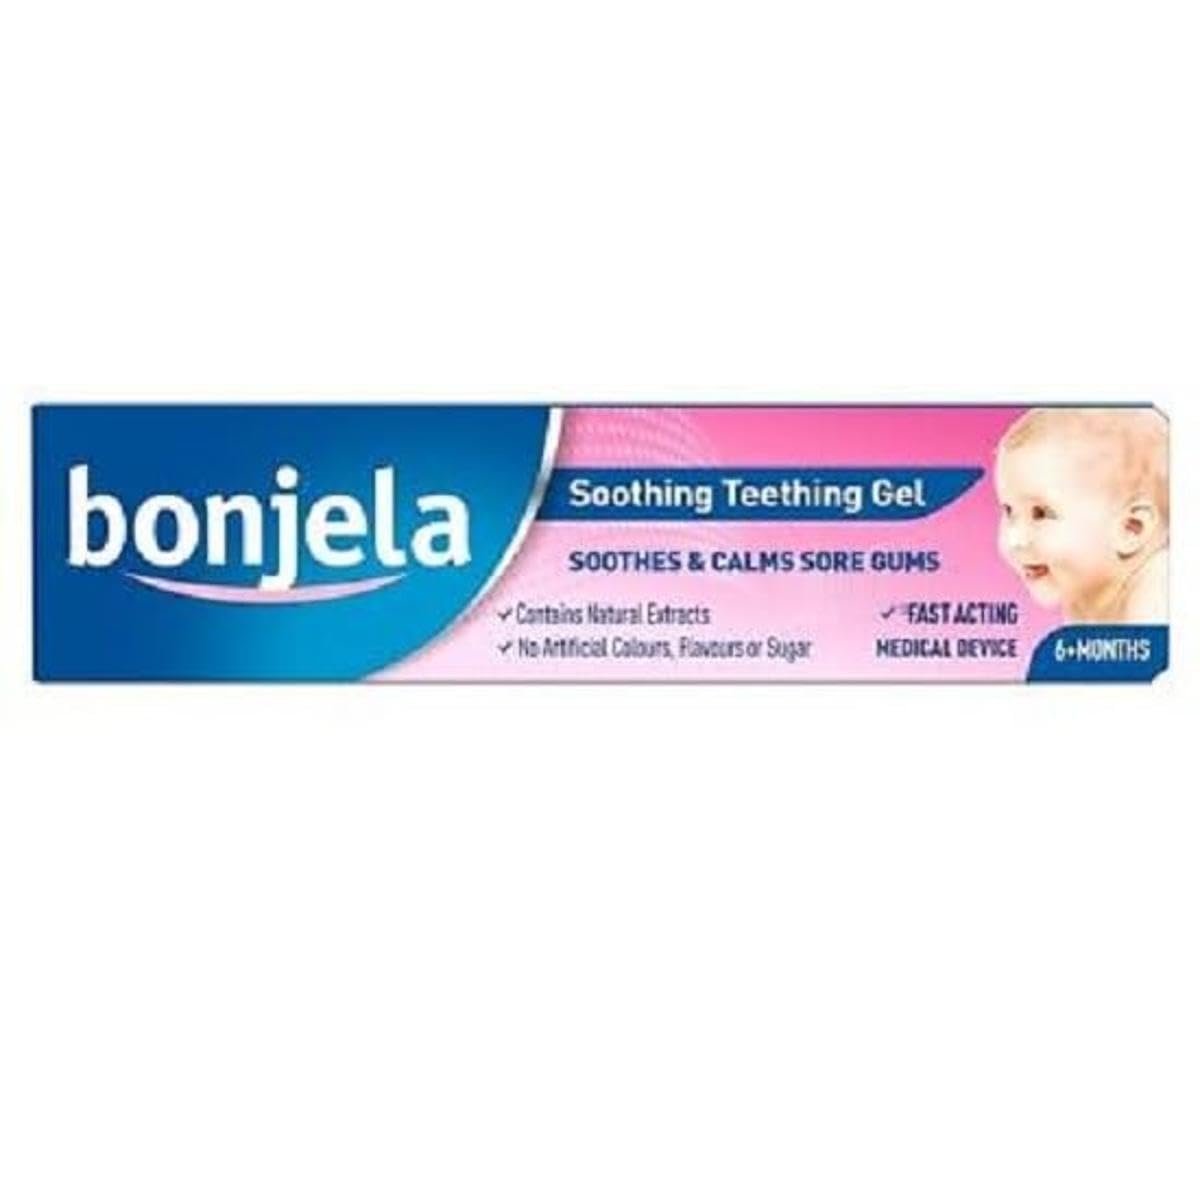 Bonjela Baby Teething Gel For Soothing Gums, 15g, Teething Pain Relief & Common Teething Symptoms, Helps Relieve Sore Gums, Inflammation & Mouth Ulcers for Babies & Infants, Oral Treatment